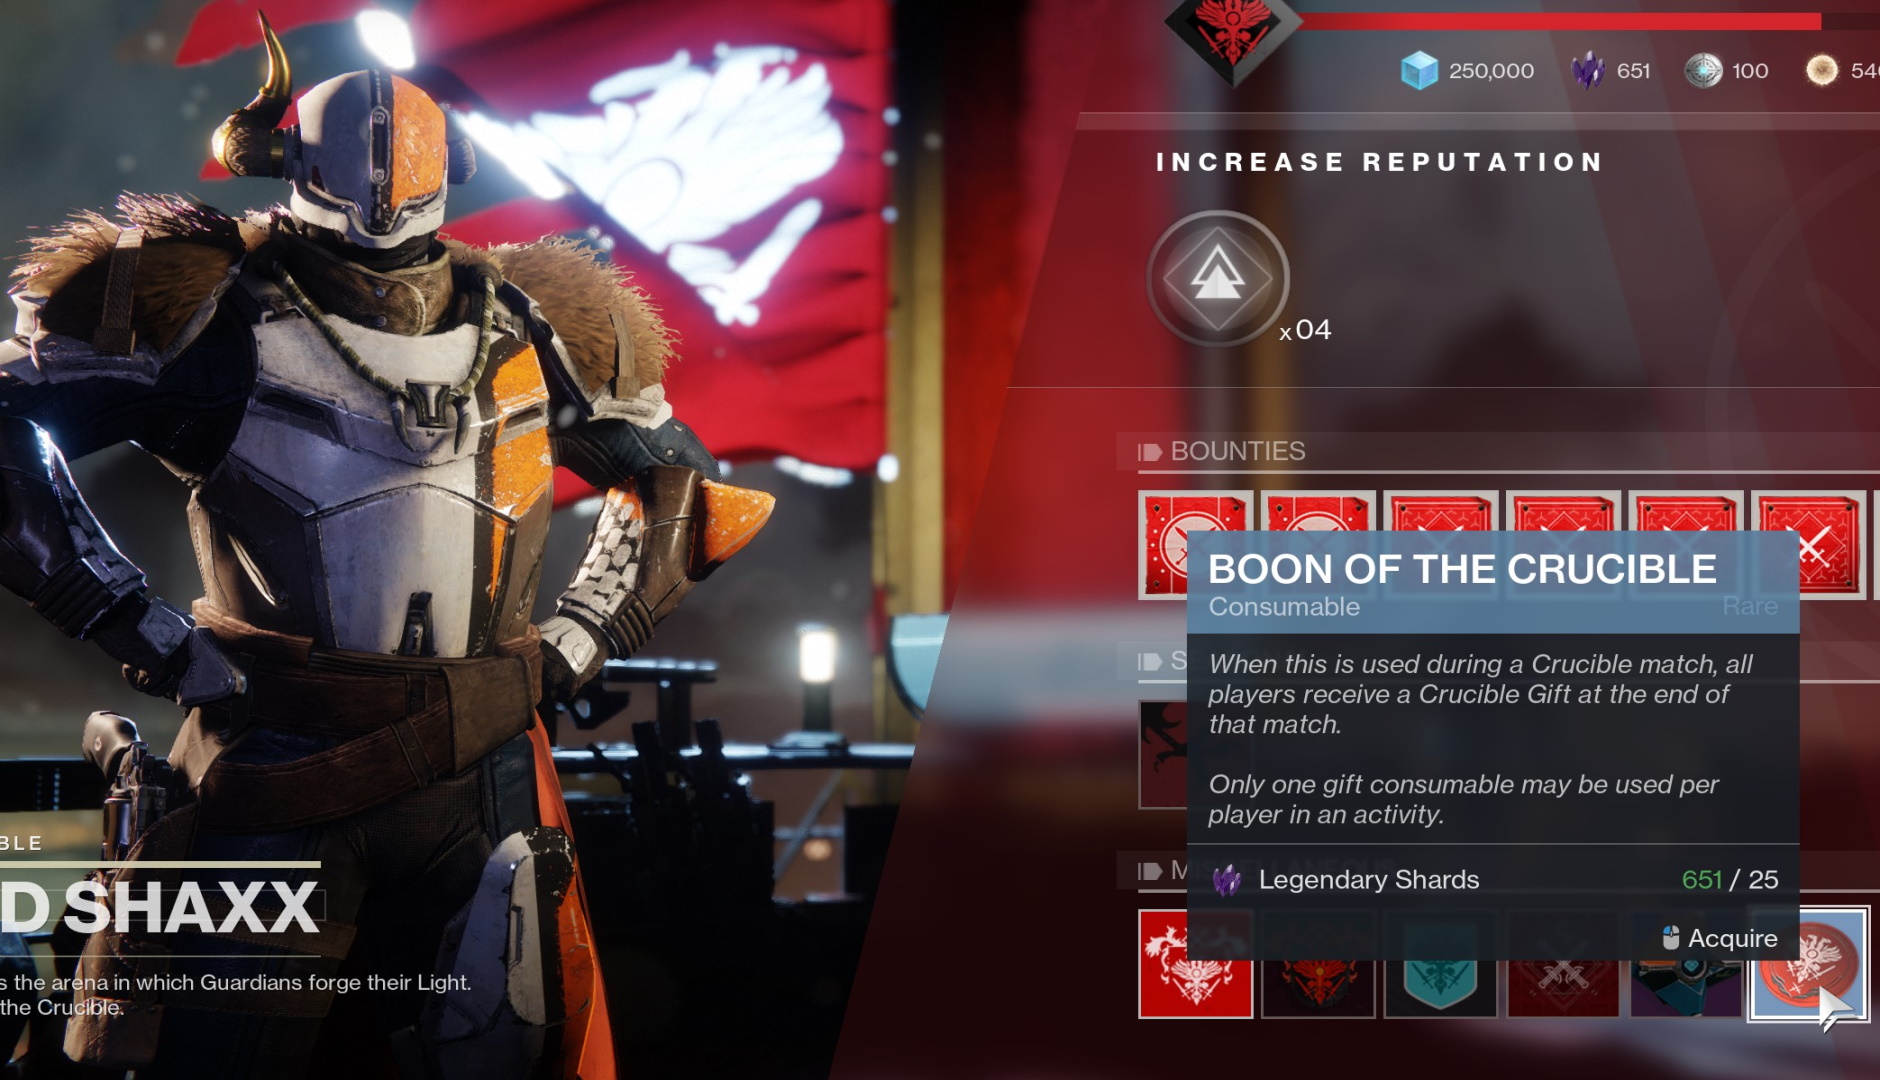 What are Vanguard and Crucible Boons in Destiny 2? - Gamepur